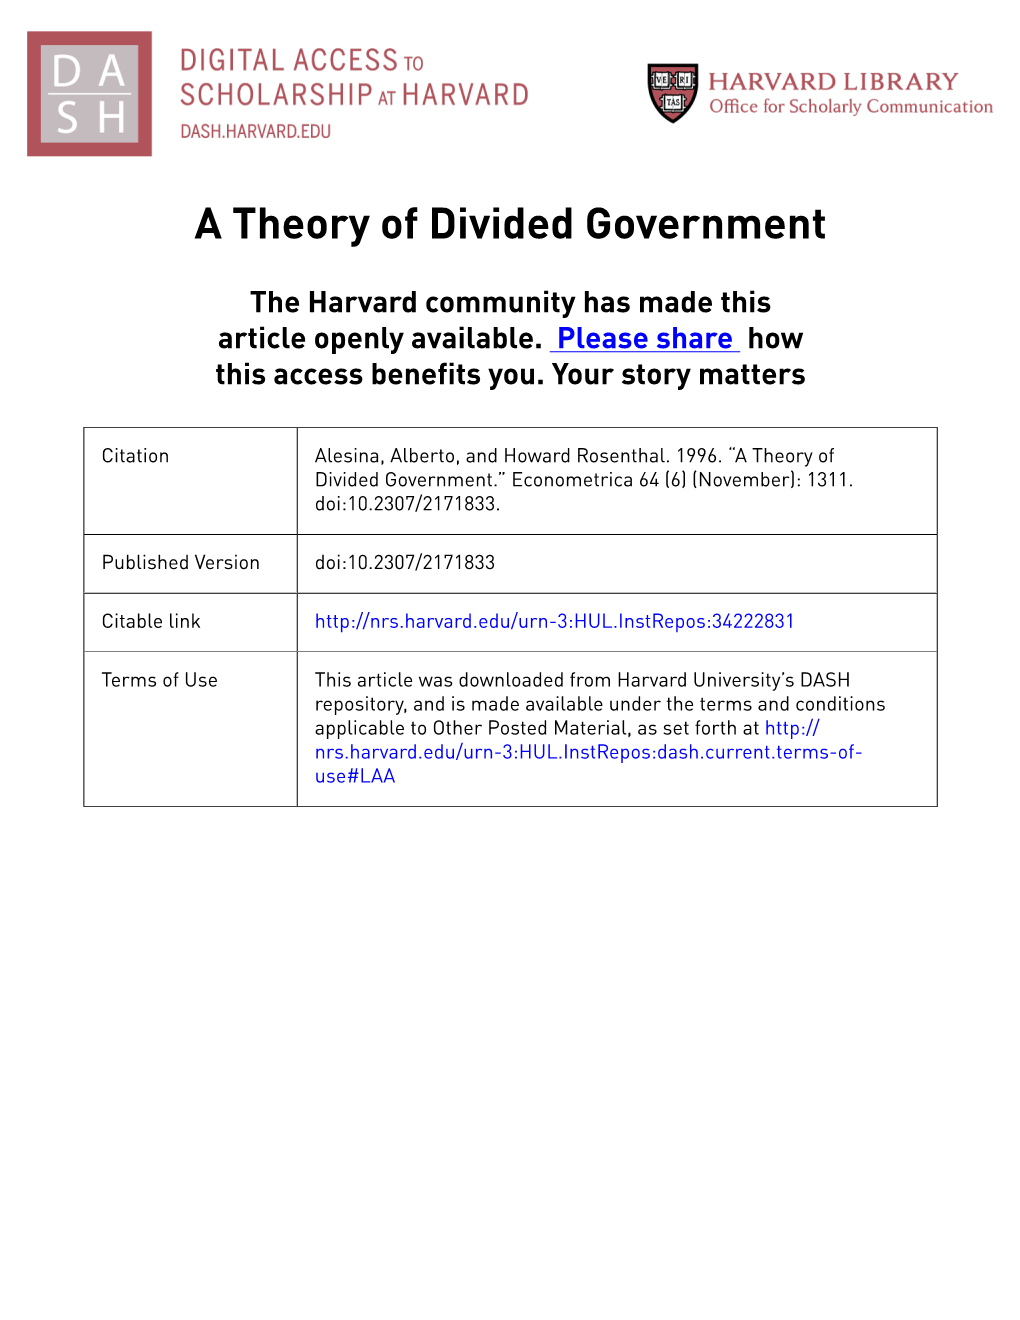 A Theory of Divided Government